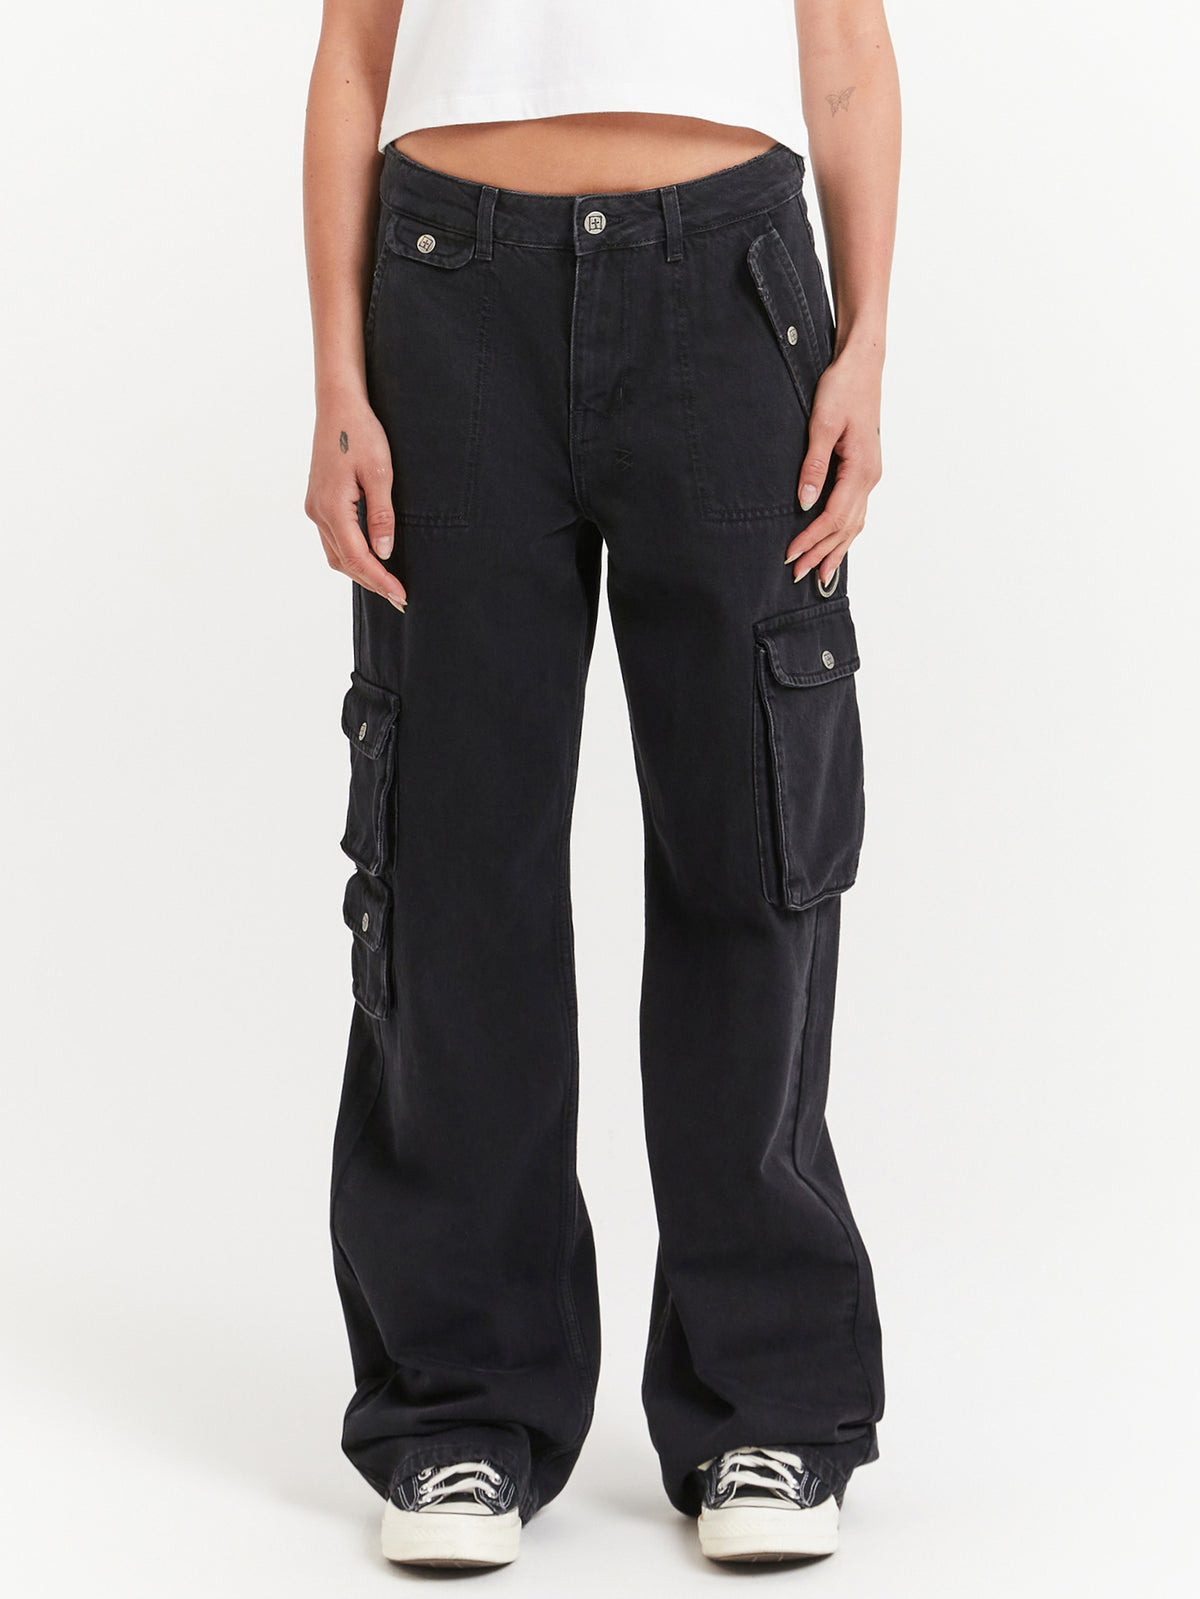 Low Rider Stealth Cargo Pants in Black